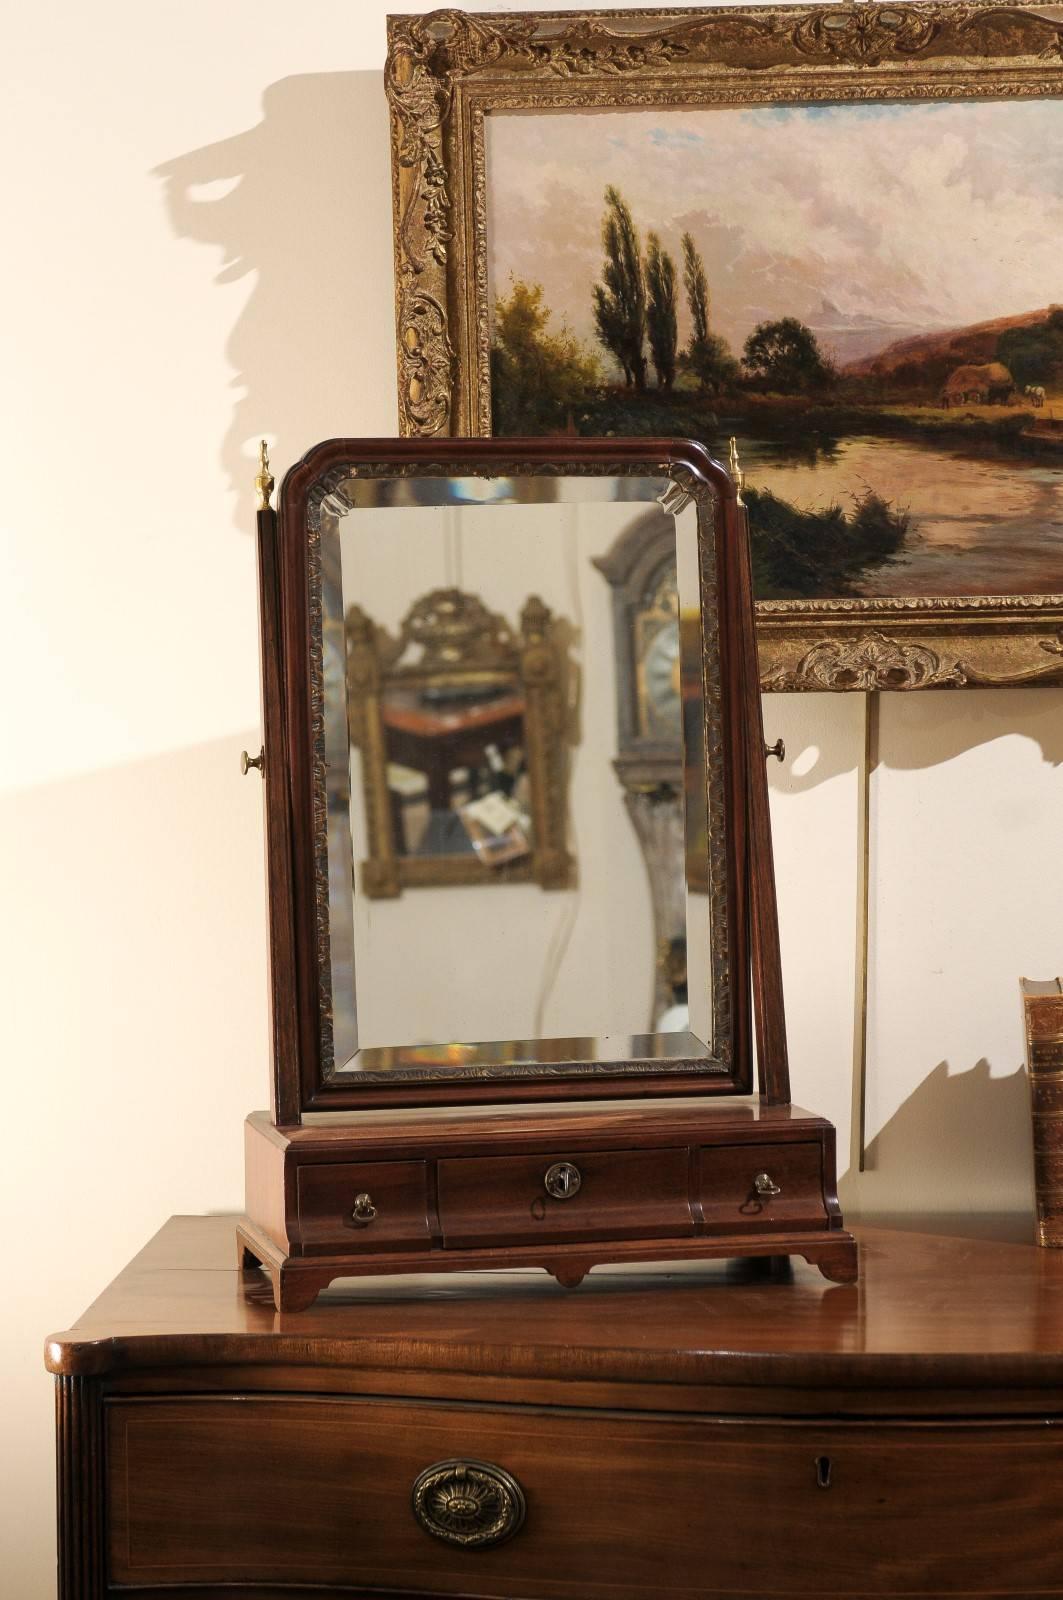 A late 18th century English George III mahogany shaving mirror attached to base with 3 drawers ending in bracket feet.